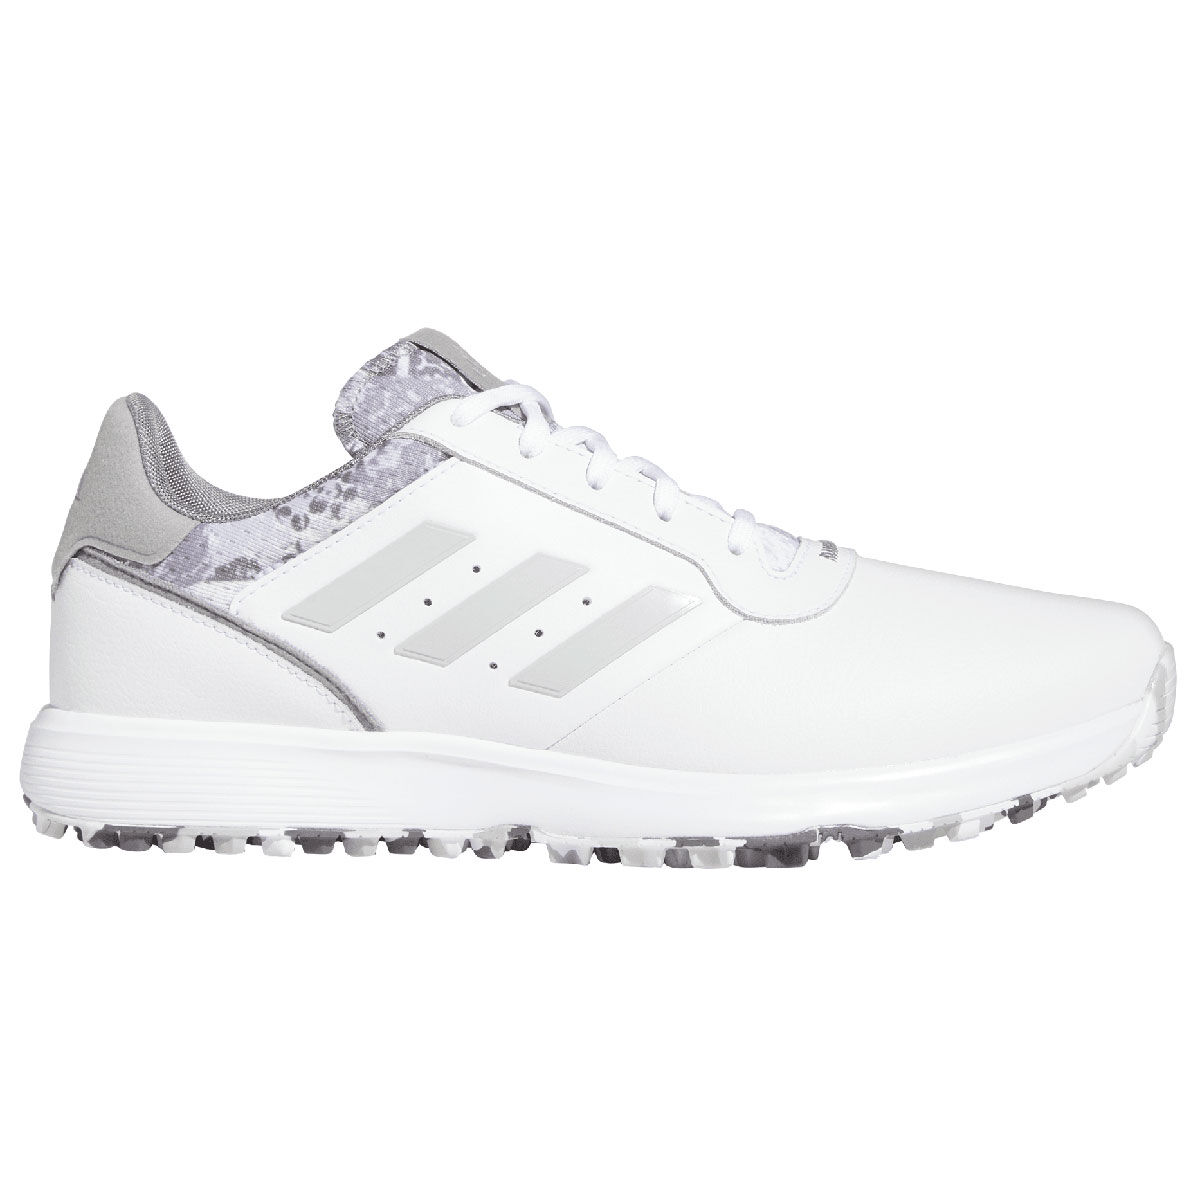 adidas Golf Mens White and Grey Lightweight S2G Leather Waterproof Spikeless Regular Fit Golf Shoes, Size: 9 | American Golf